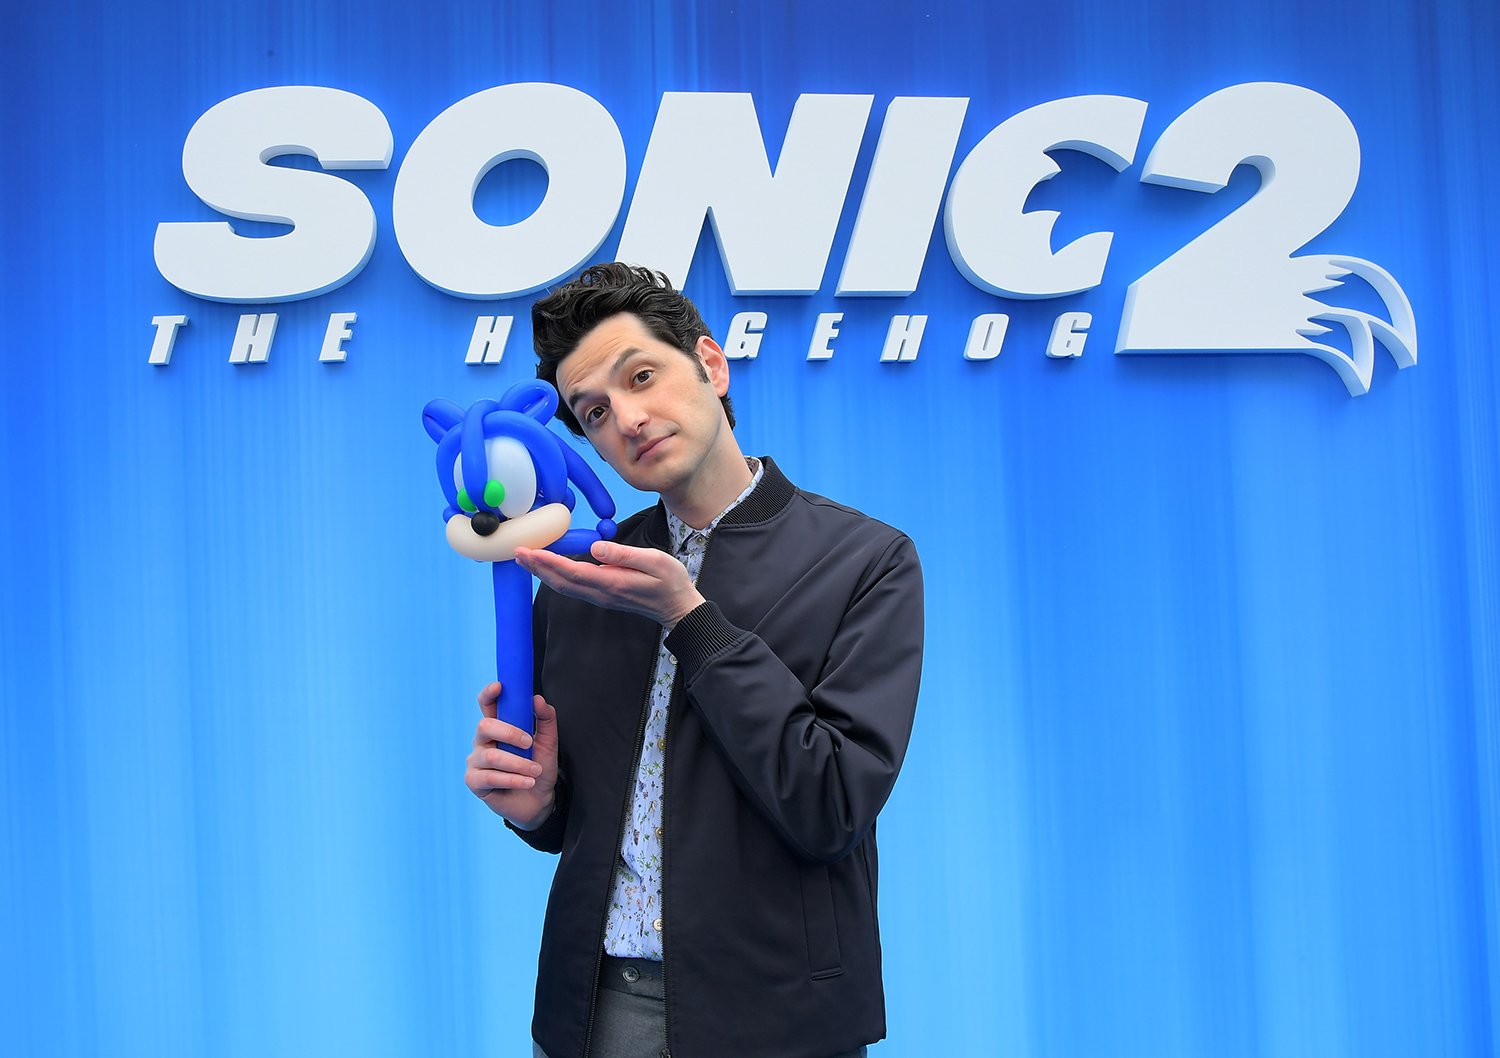 Sonic the Hedgehog 2' drops two exciting teasers